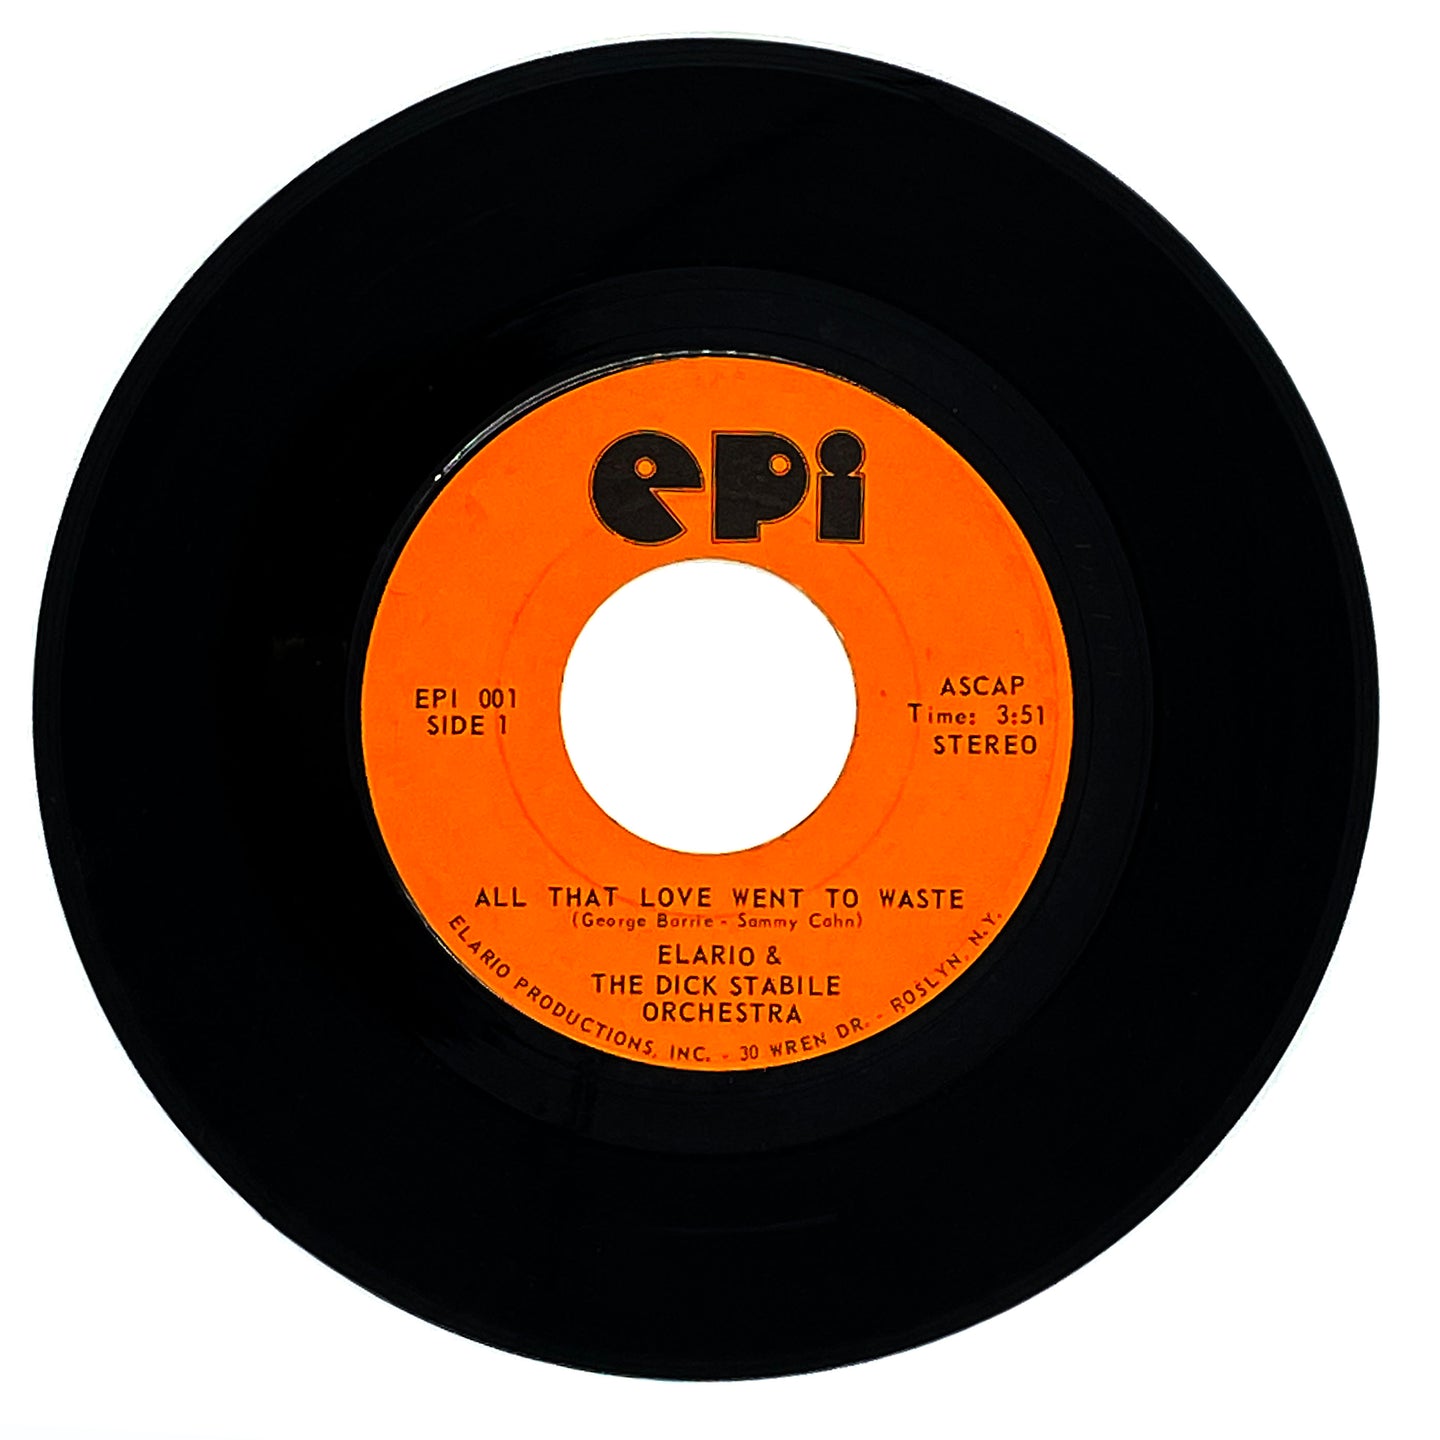 Elario & The Dick Stabile Orchestra : ALL THAT LOVE WENT TO WASTE/ WILLINGLY